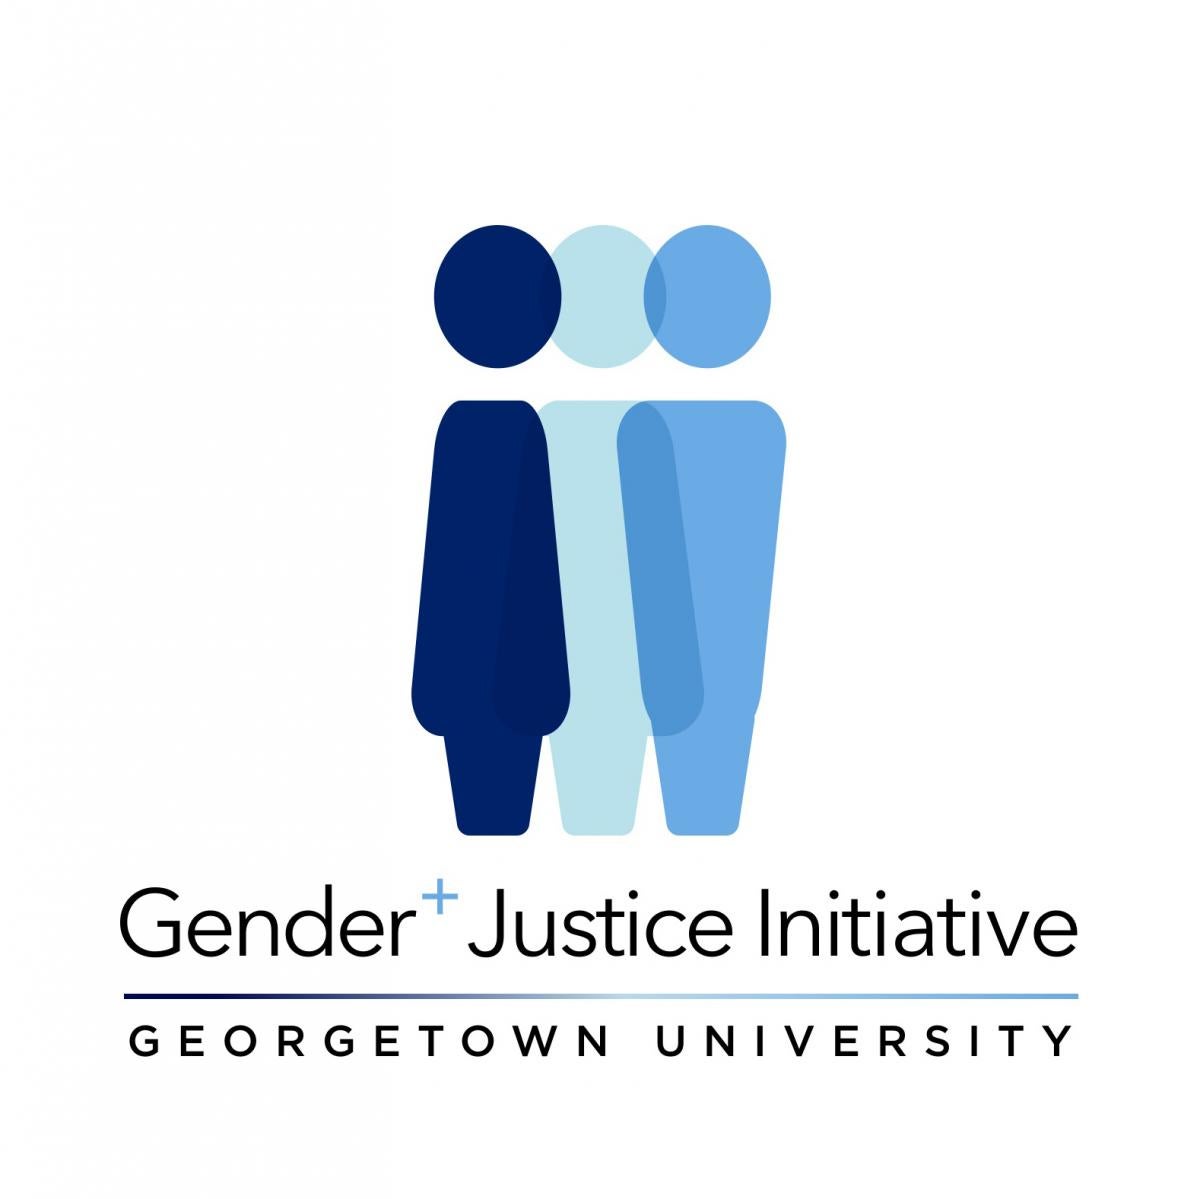 Georgetown University Gender+ Justice Initiative logo, with three human figures in shades of blue